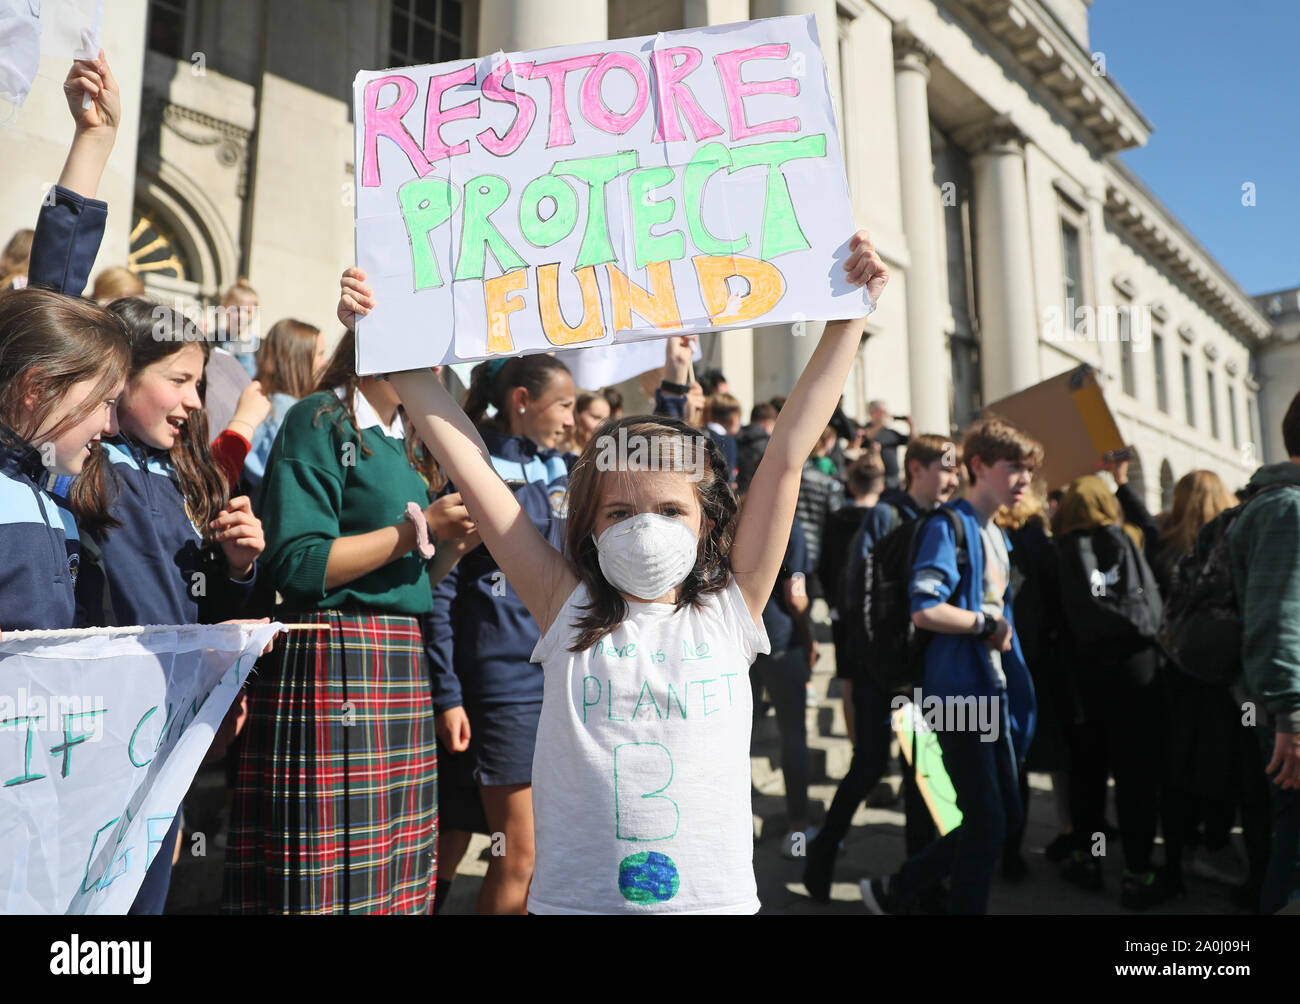 Sadhbh O'Connell , 10, from Scoil Mhuire School at a protest organised by Stop Climate Chaos Coalition in Dublin, Ireland. Stock Photo